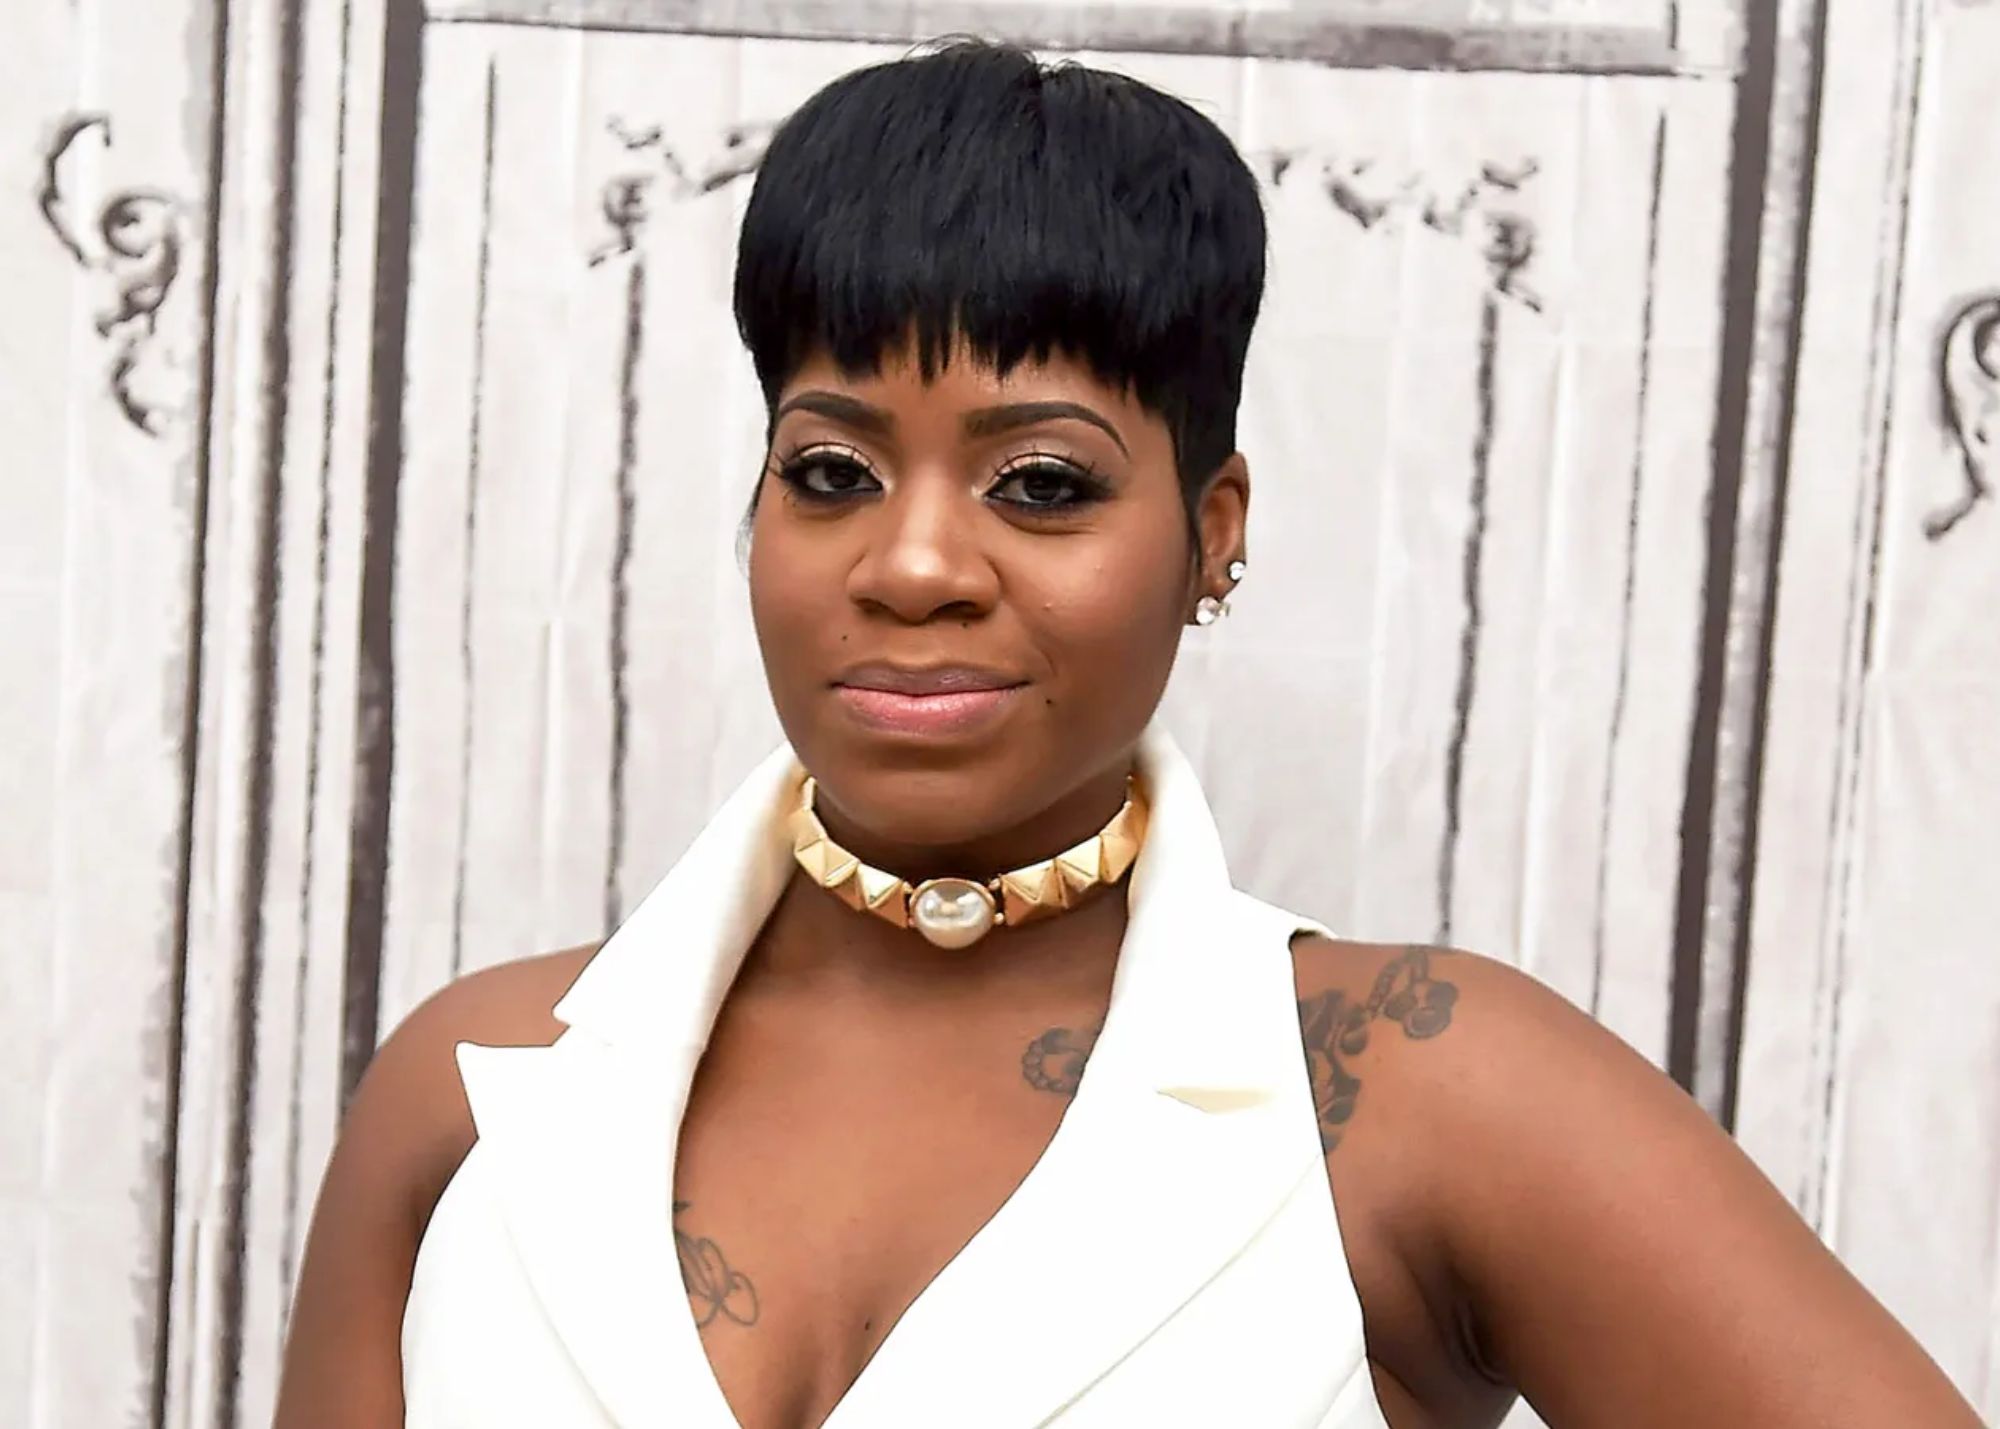 Fantasia is dressed in a white sleeveless dress and a pearl necklace around her neck